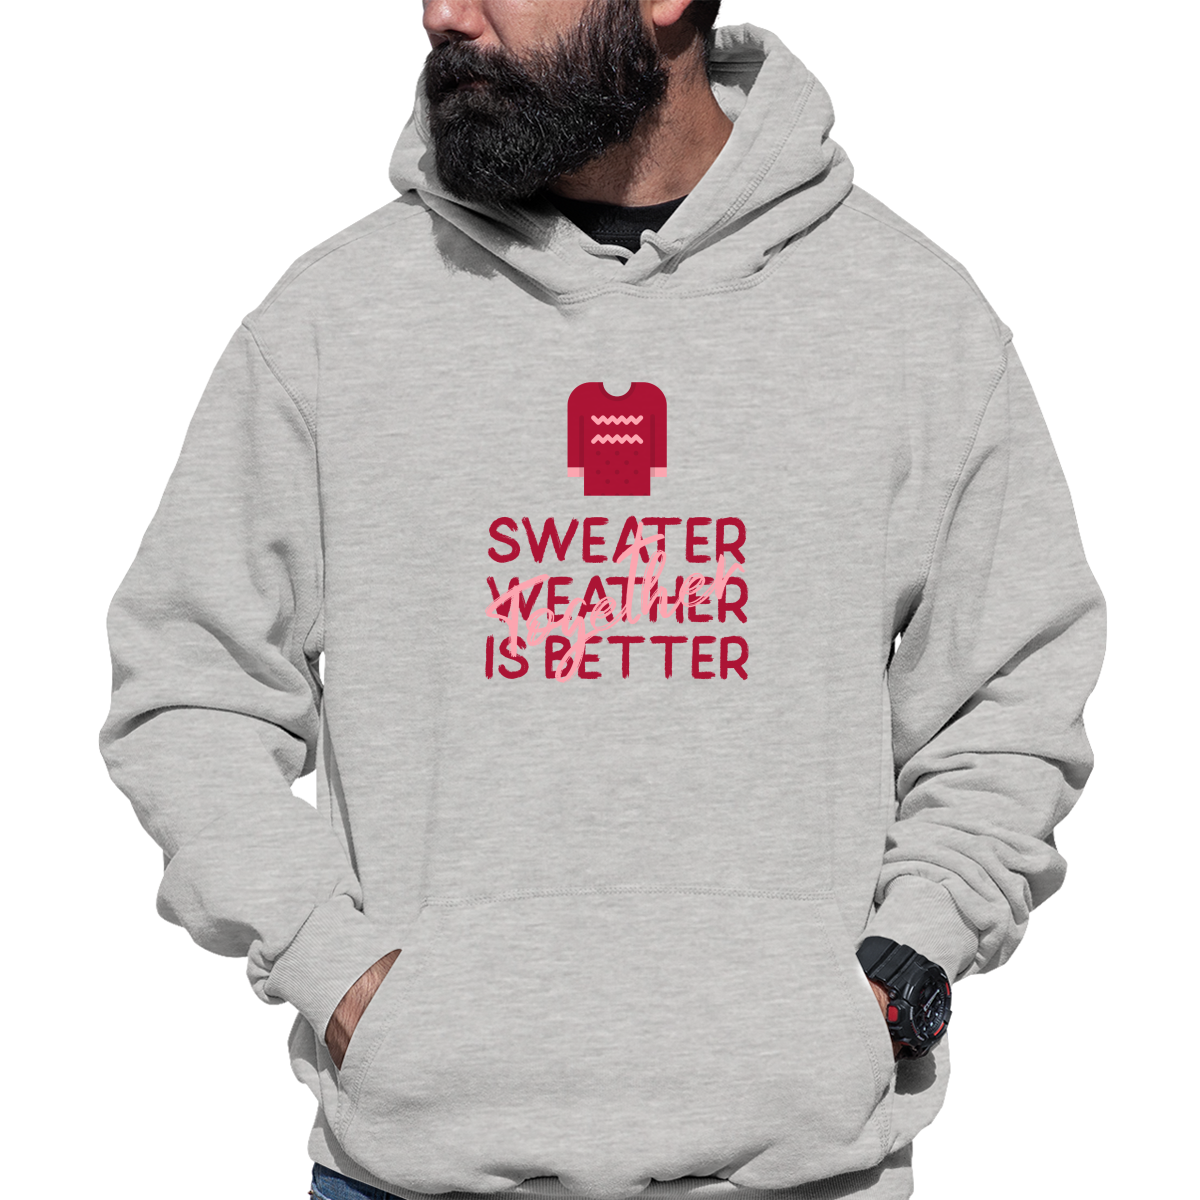 Sweather Weather is Better Together Unisex Hoodie | Gray